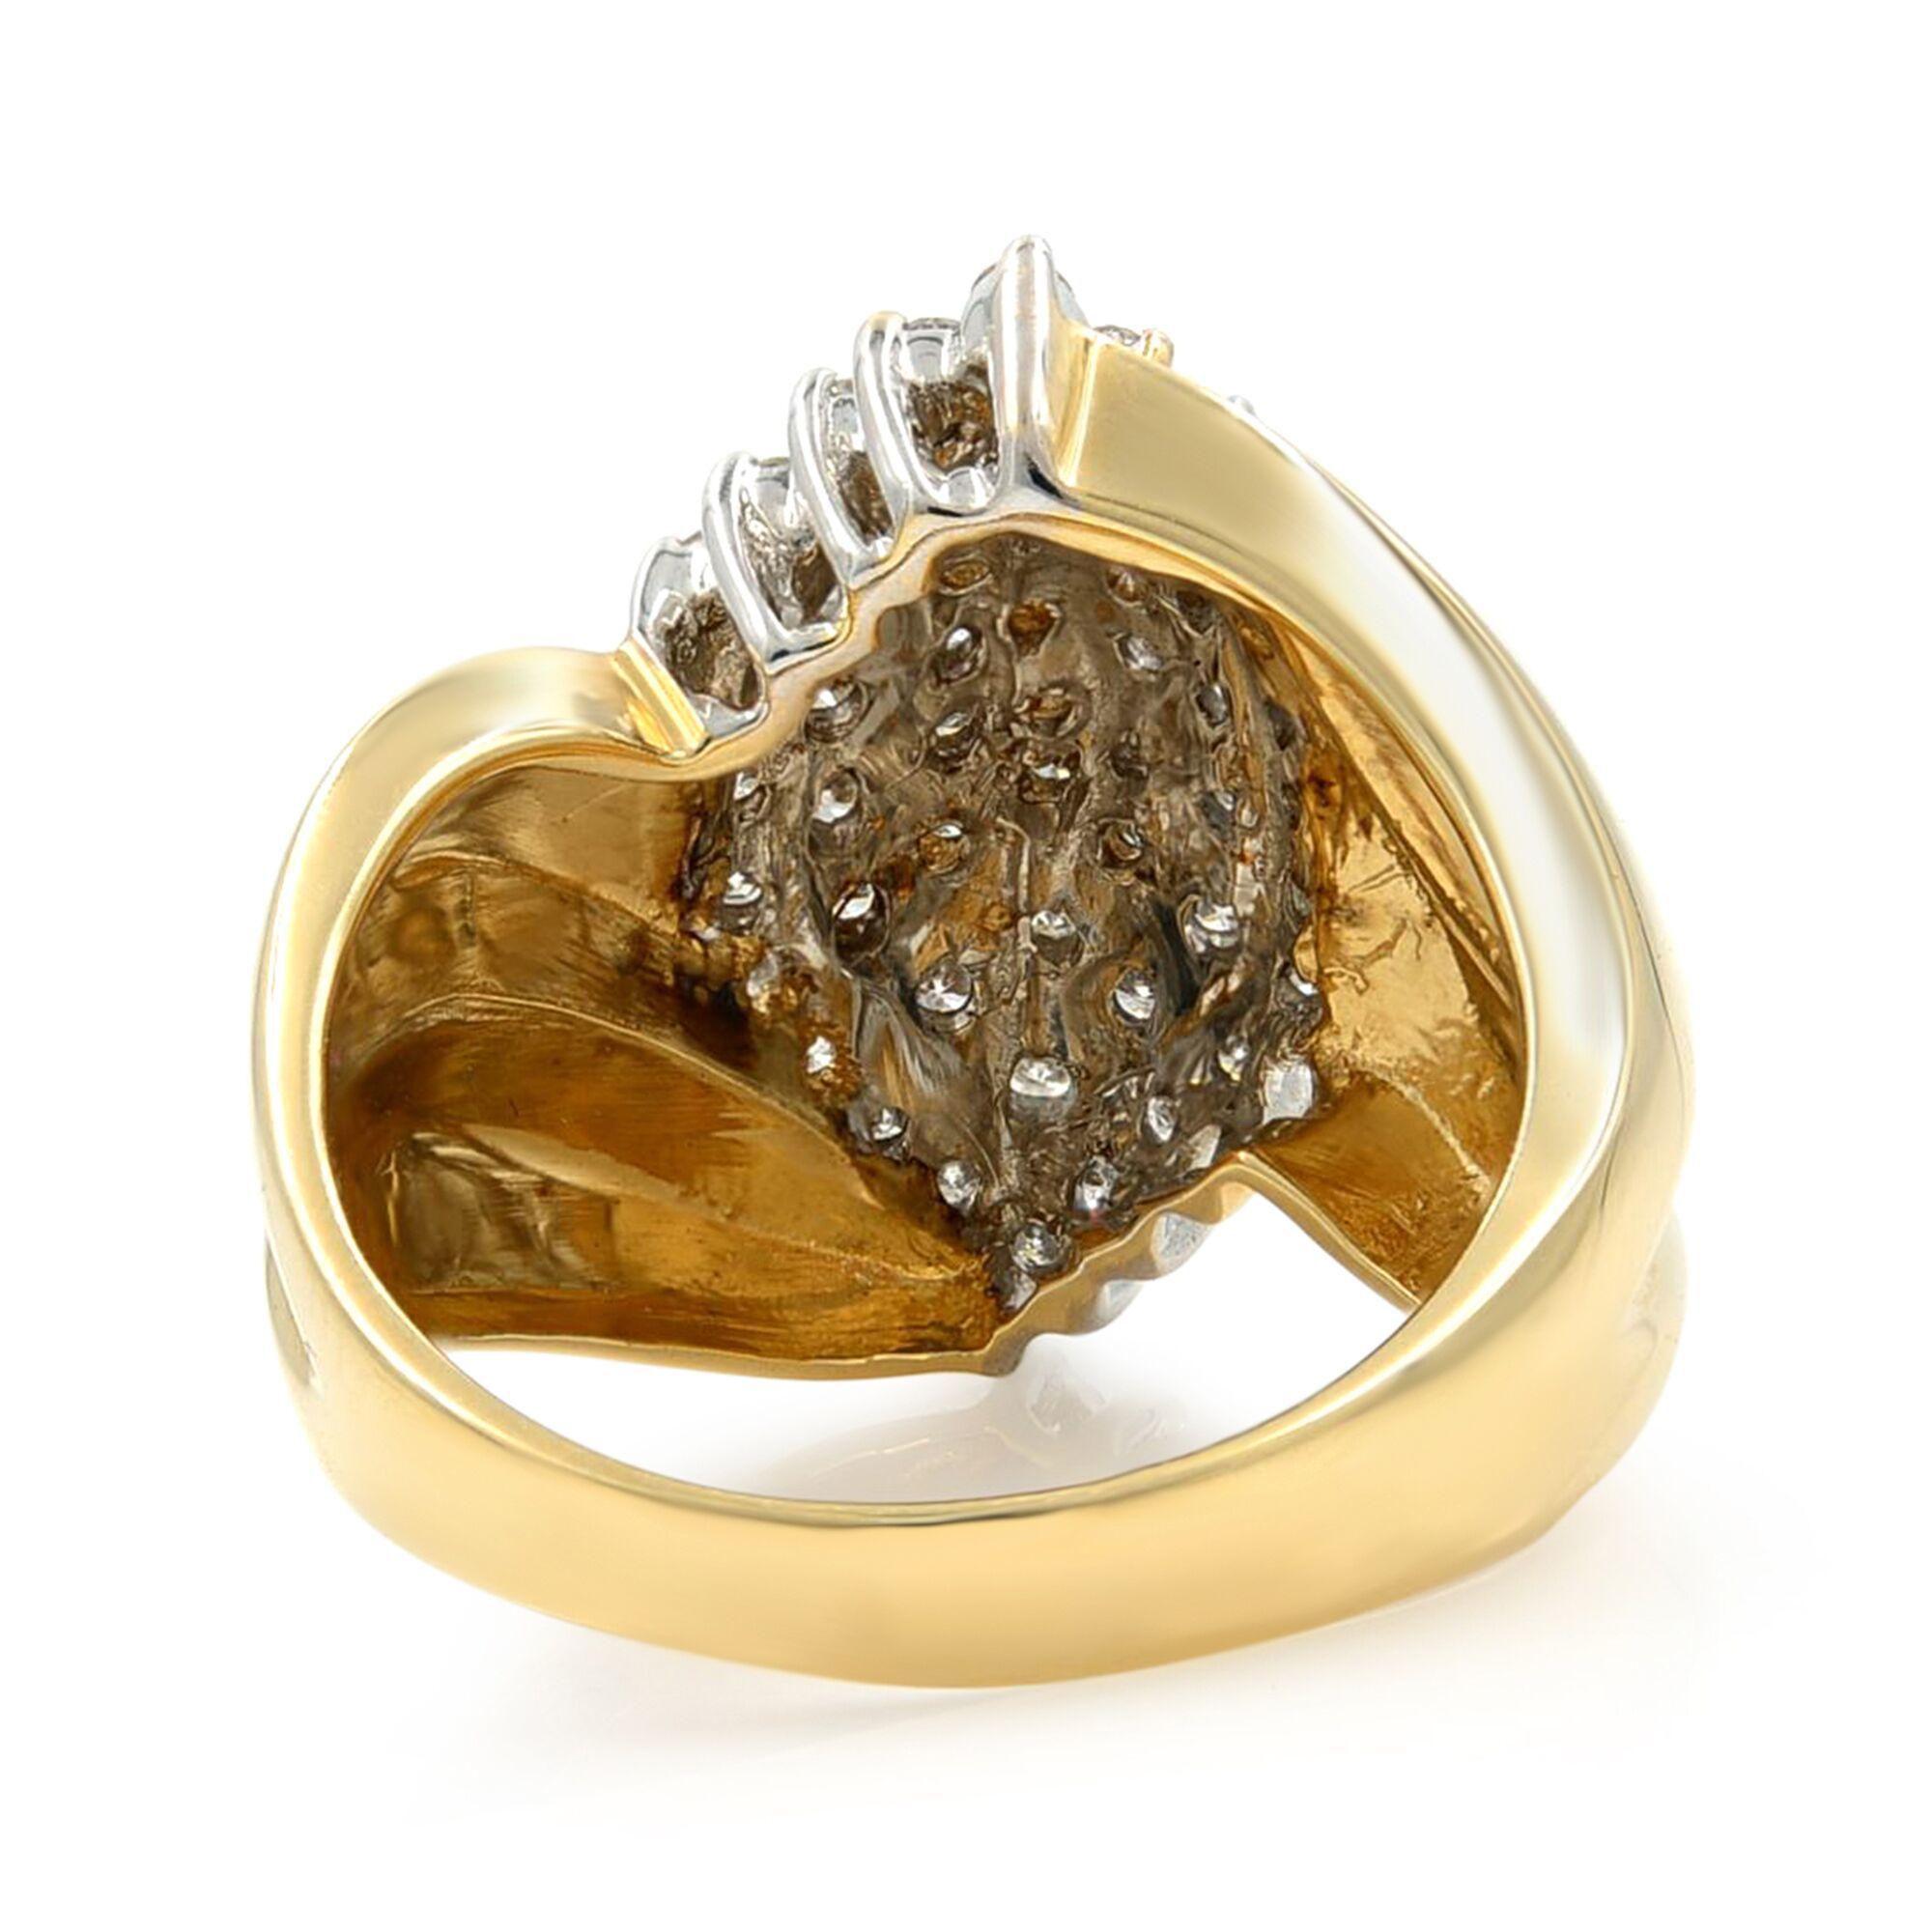 Rachel Koen Cluster Diamond Ring 14K Yellow Gold 1.30cttw In New Condition For Sale In New York, NY